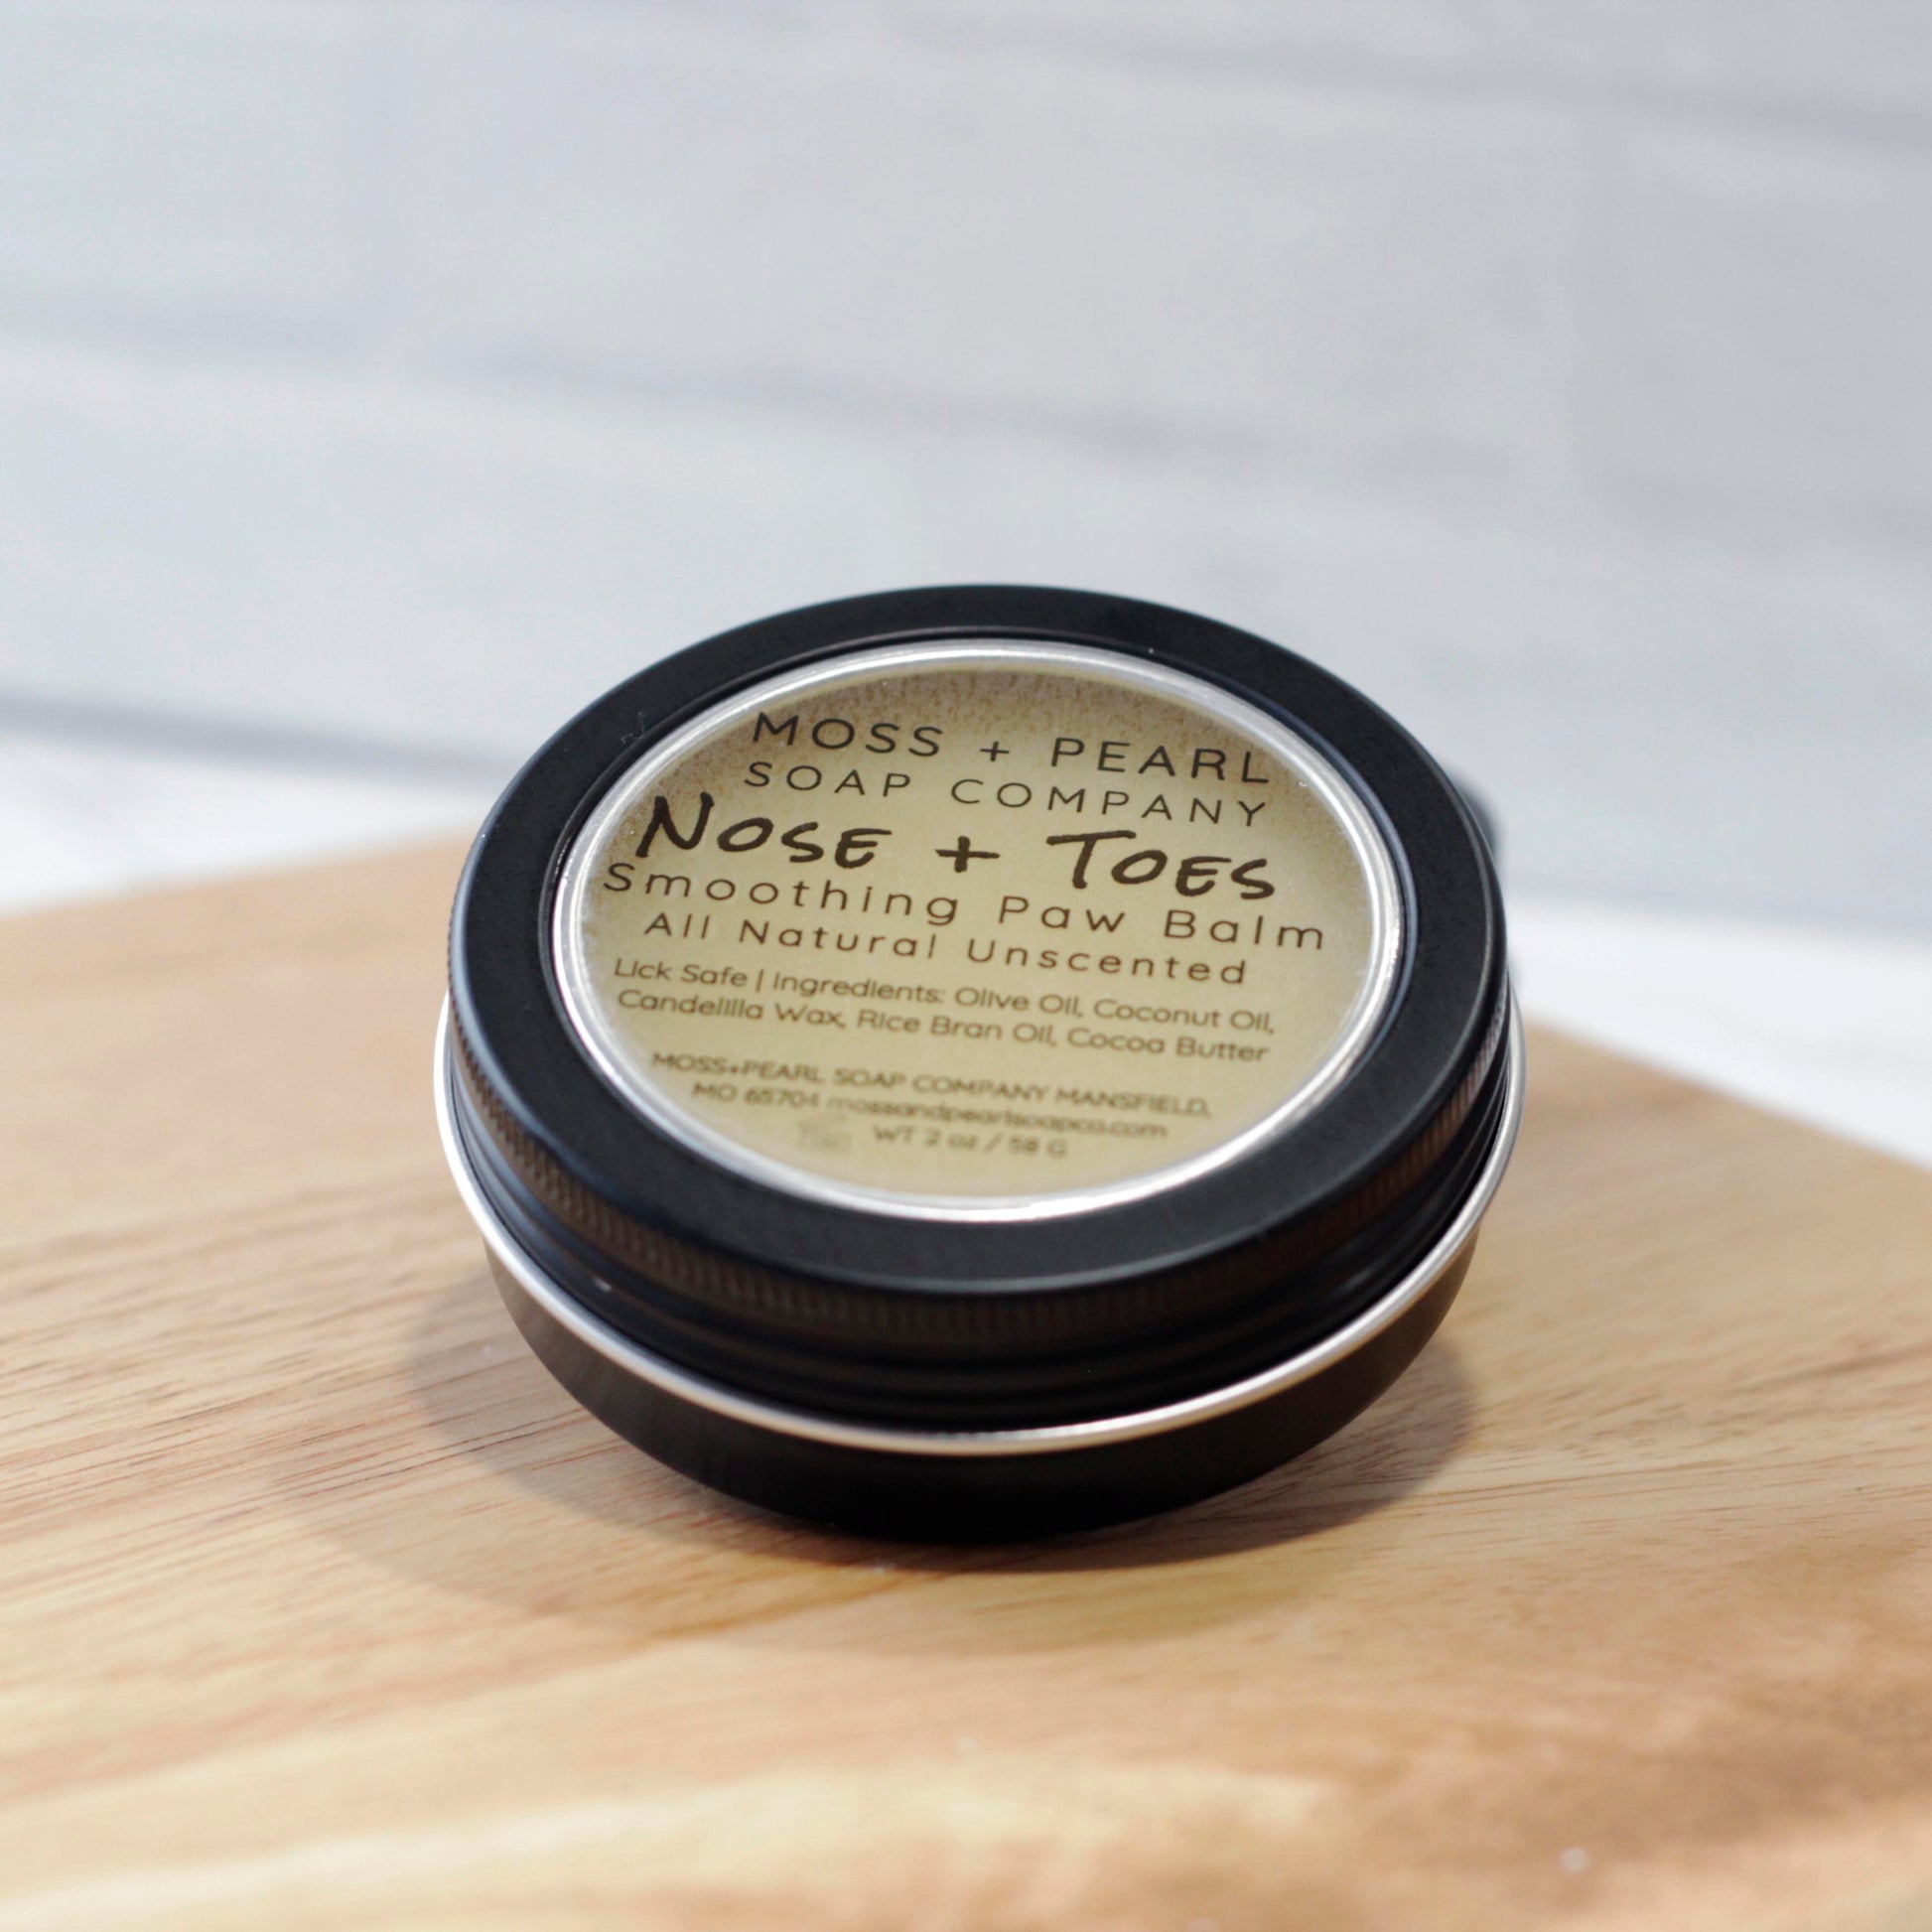 NOSE + TOES SMOOTHING PAW BALM Moss + Pearl Soap Company